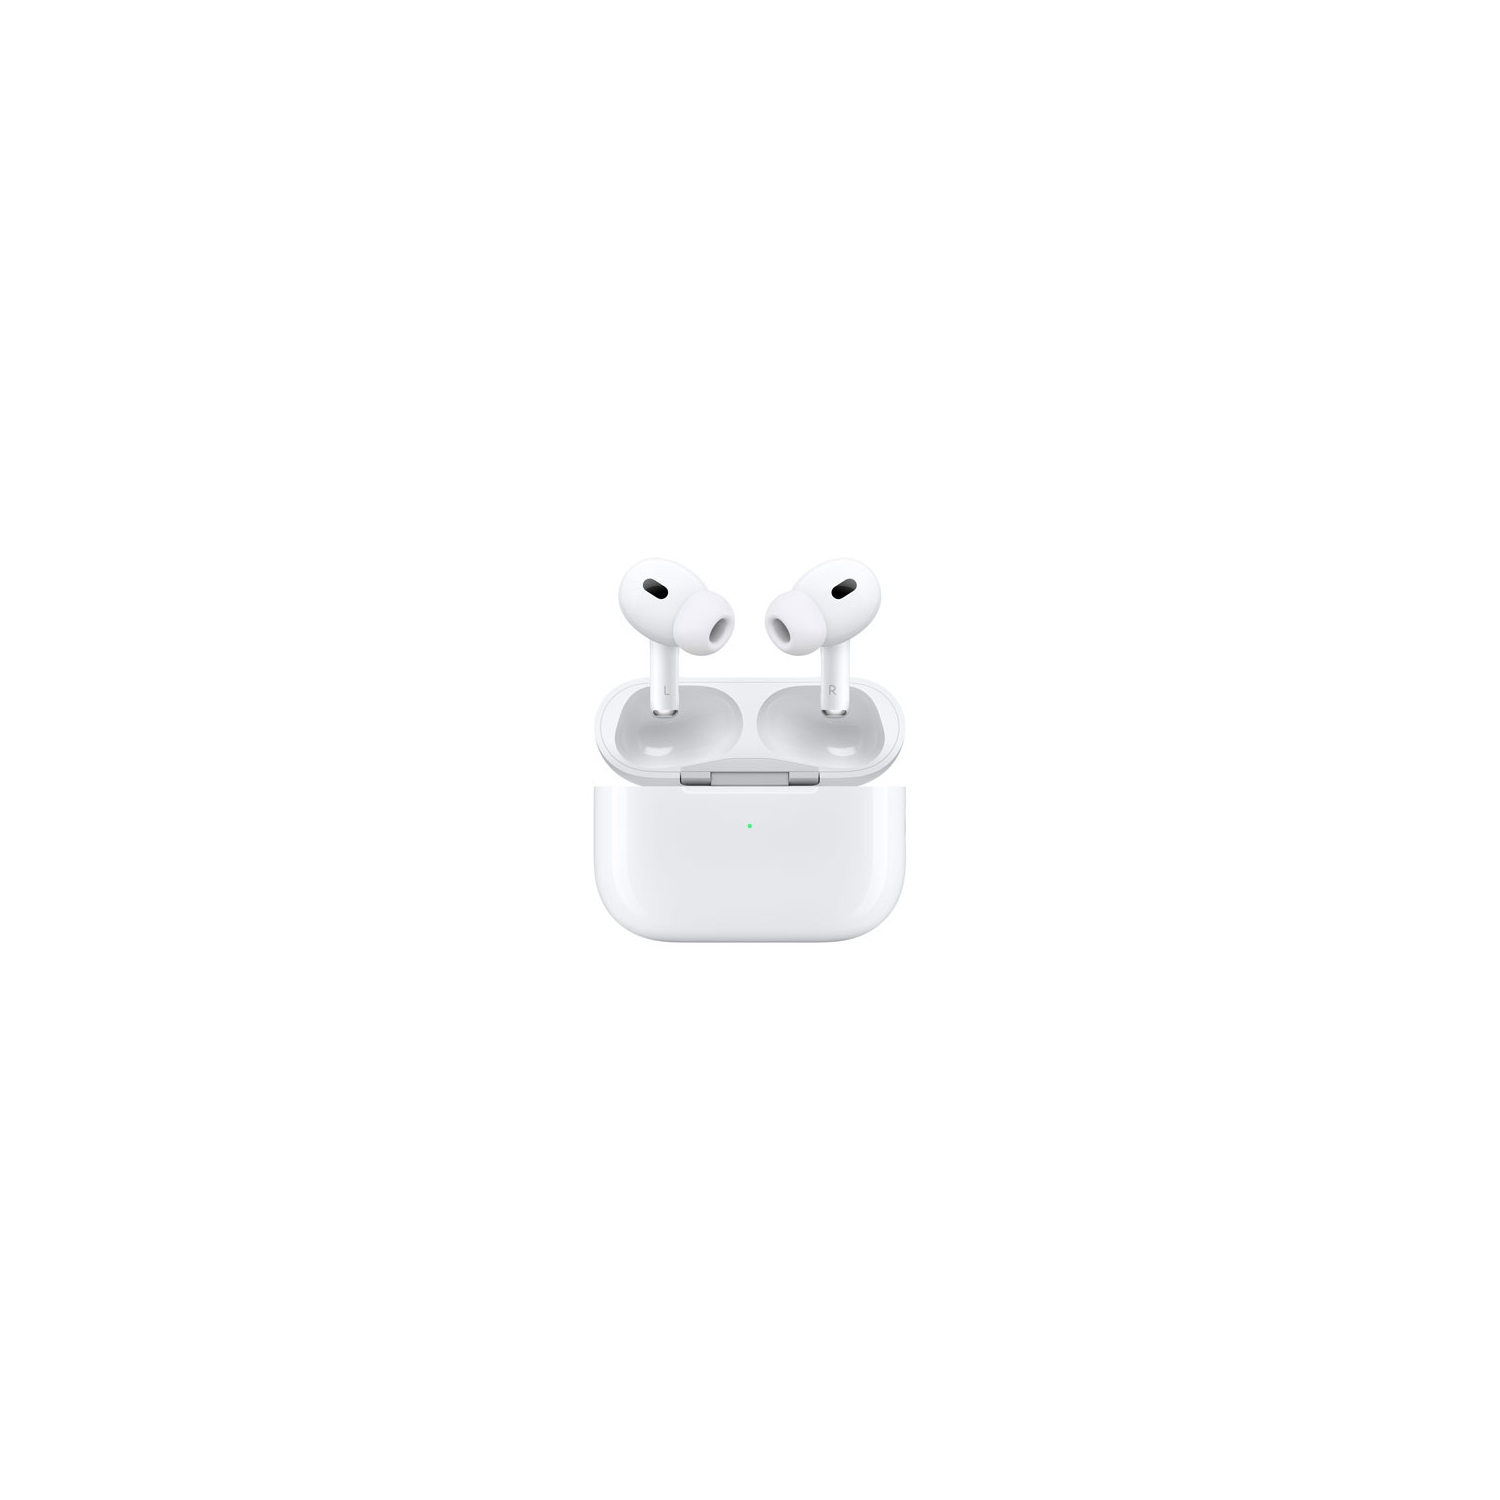 Refurbished (Excellent) - Apple AirPods Pro (2nd generation) Noise Cancelling True Wireless Earbuds with USB-C MagSafe Charging Case